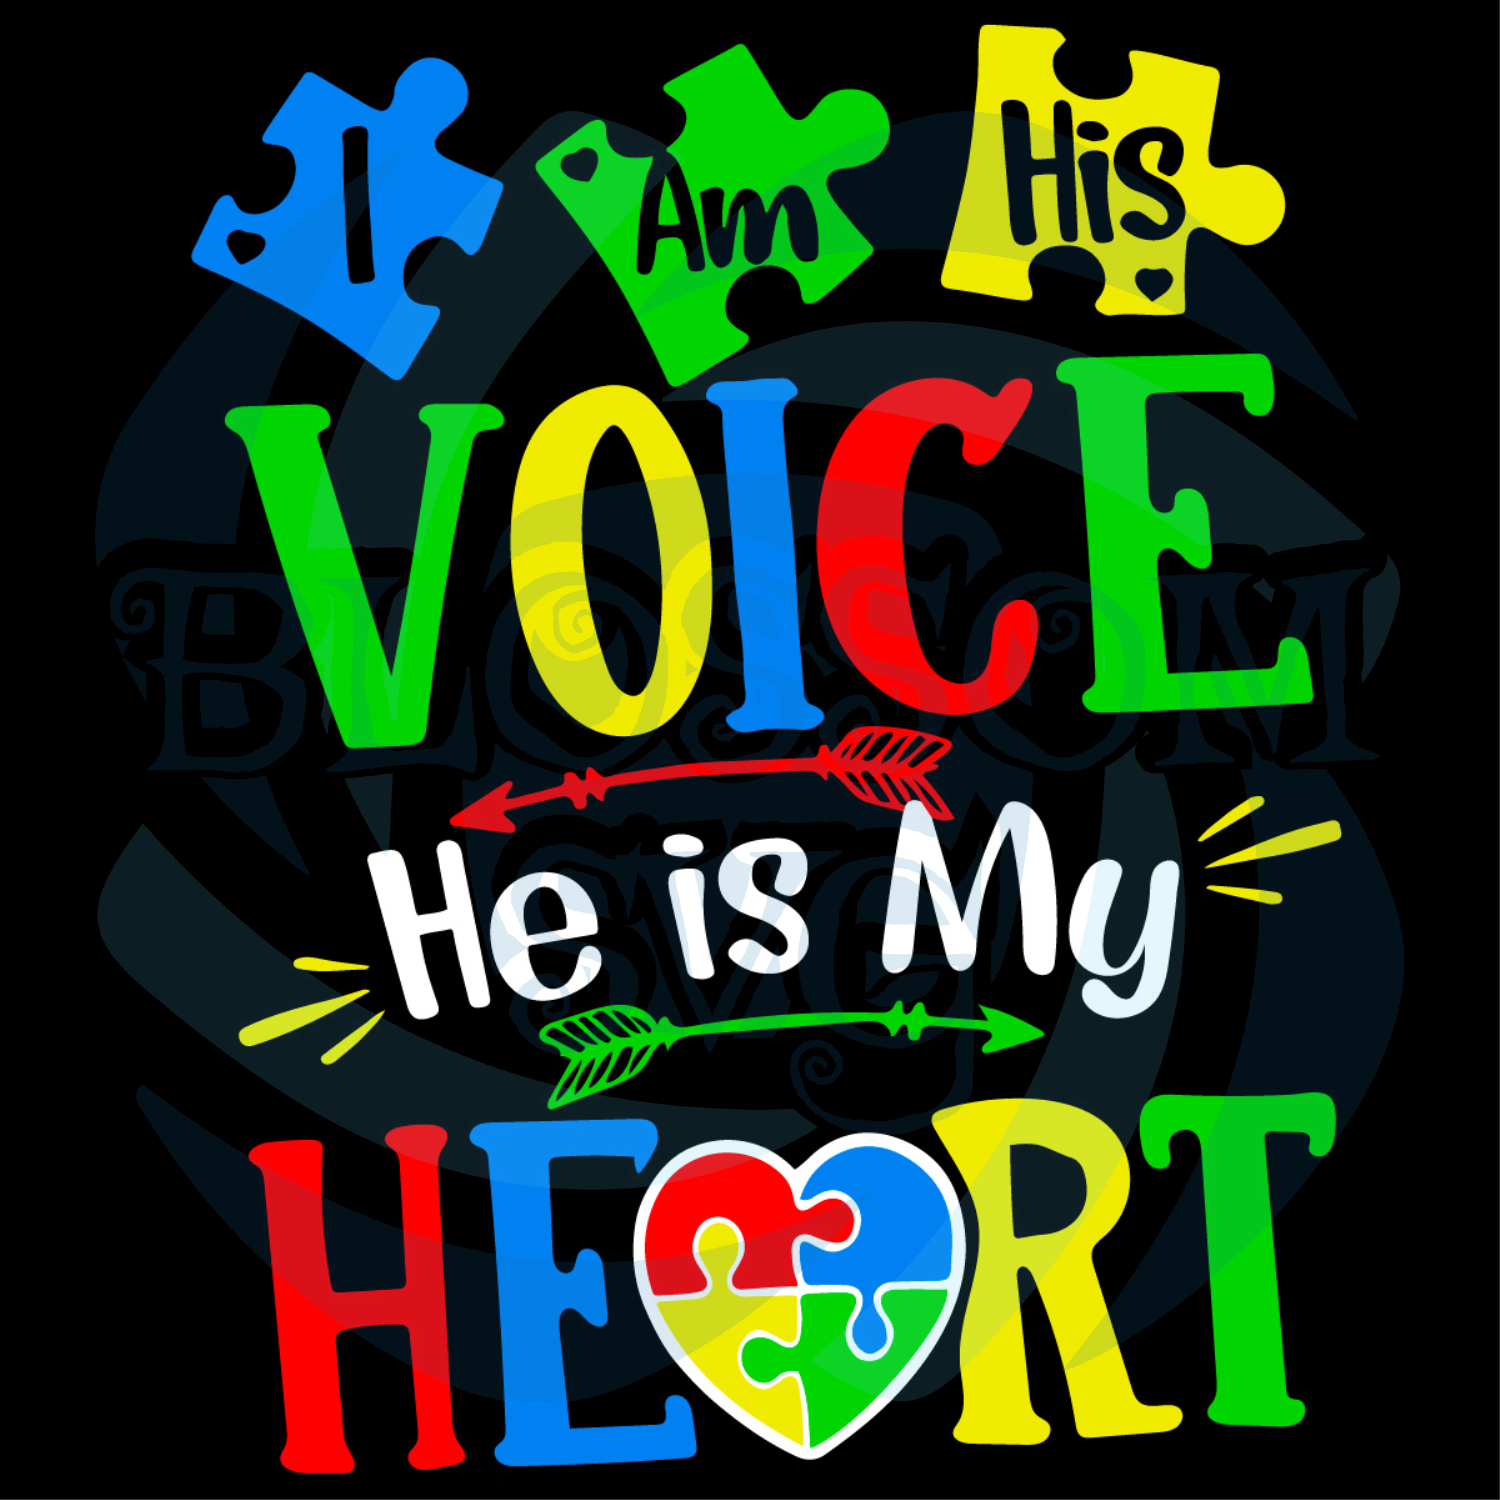 I Am Her Voice She Is My Heart Autism  PNG SVG DXF Eps Jpg